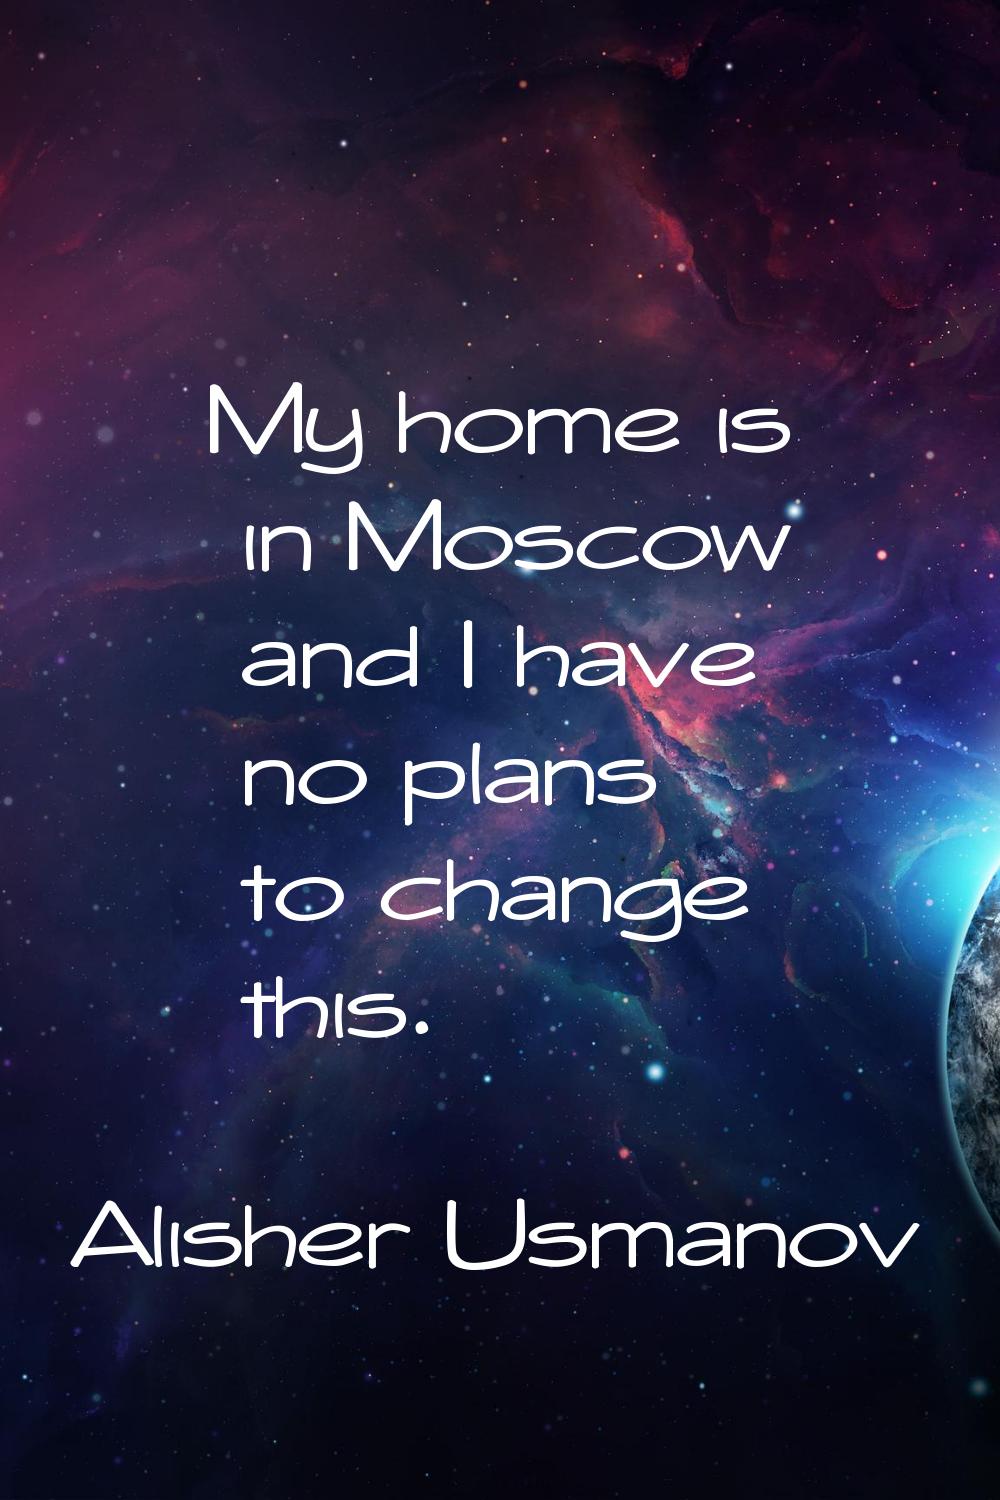 My home is in Moscow and I have no plans to change this.